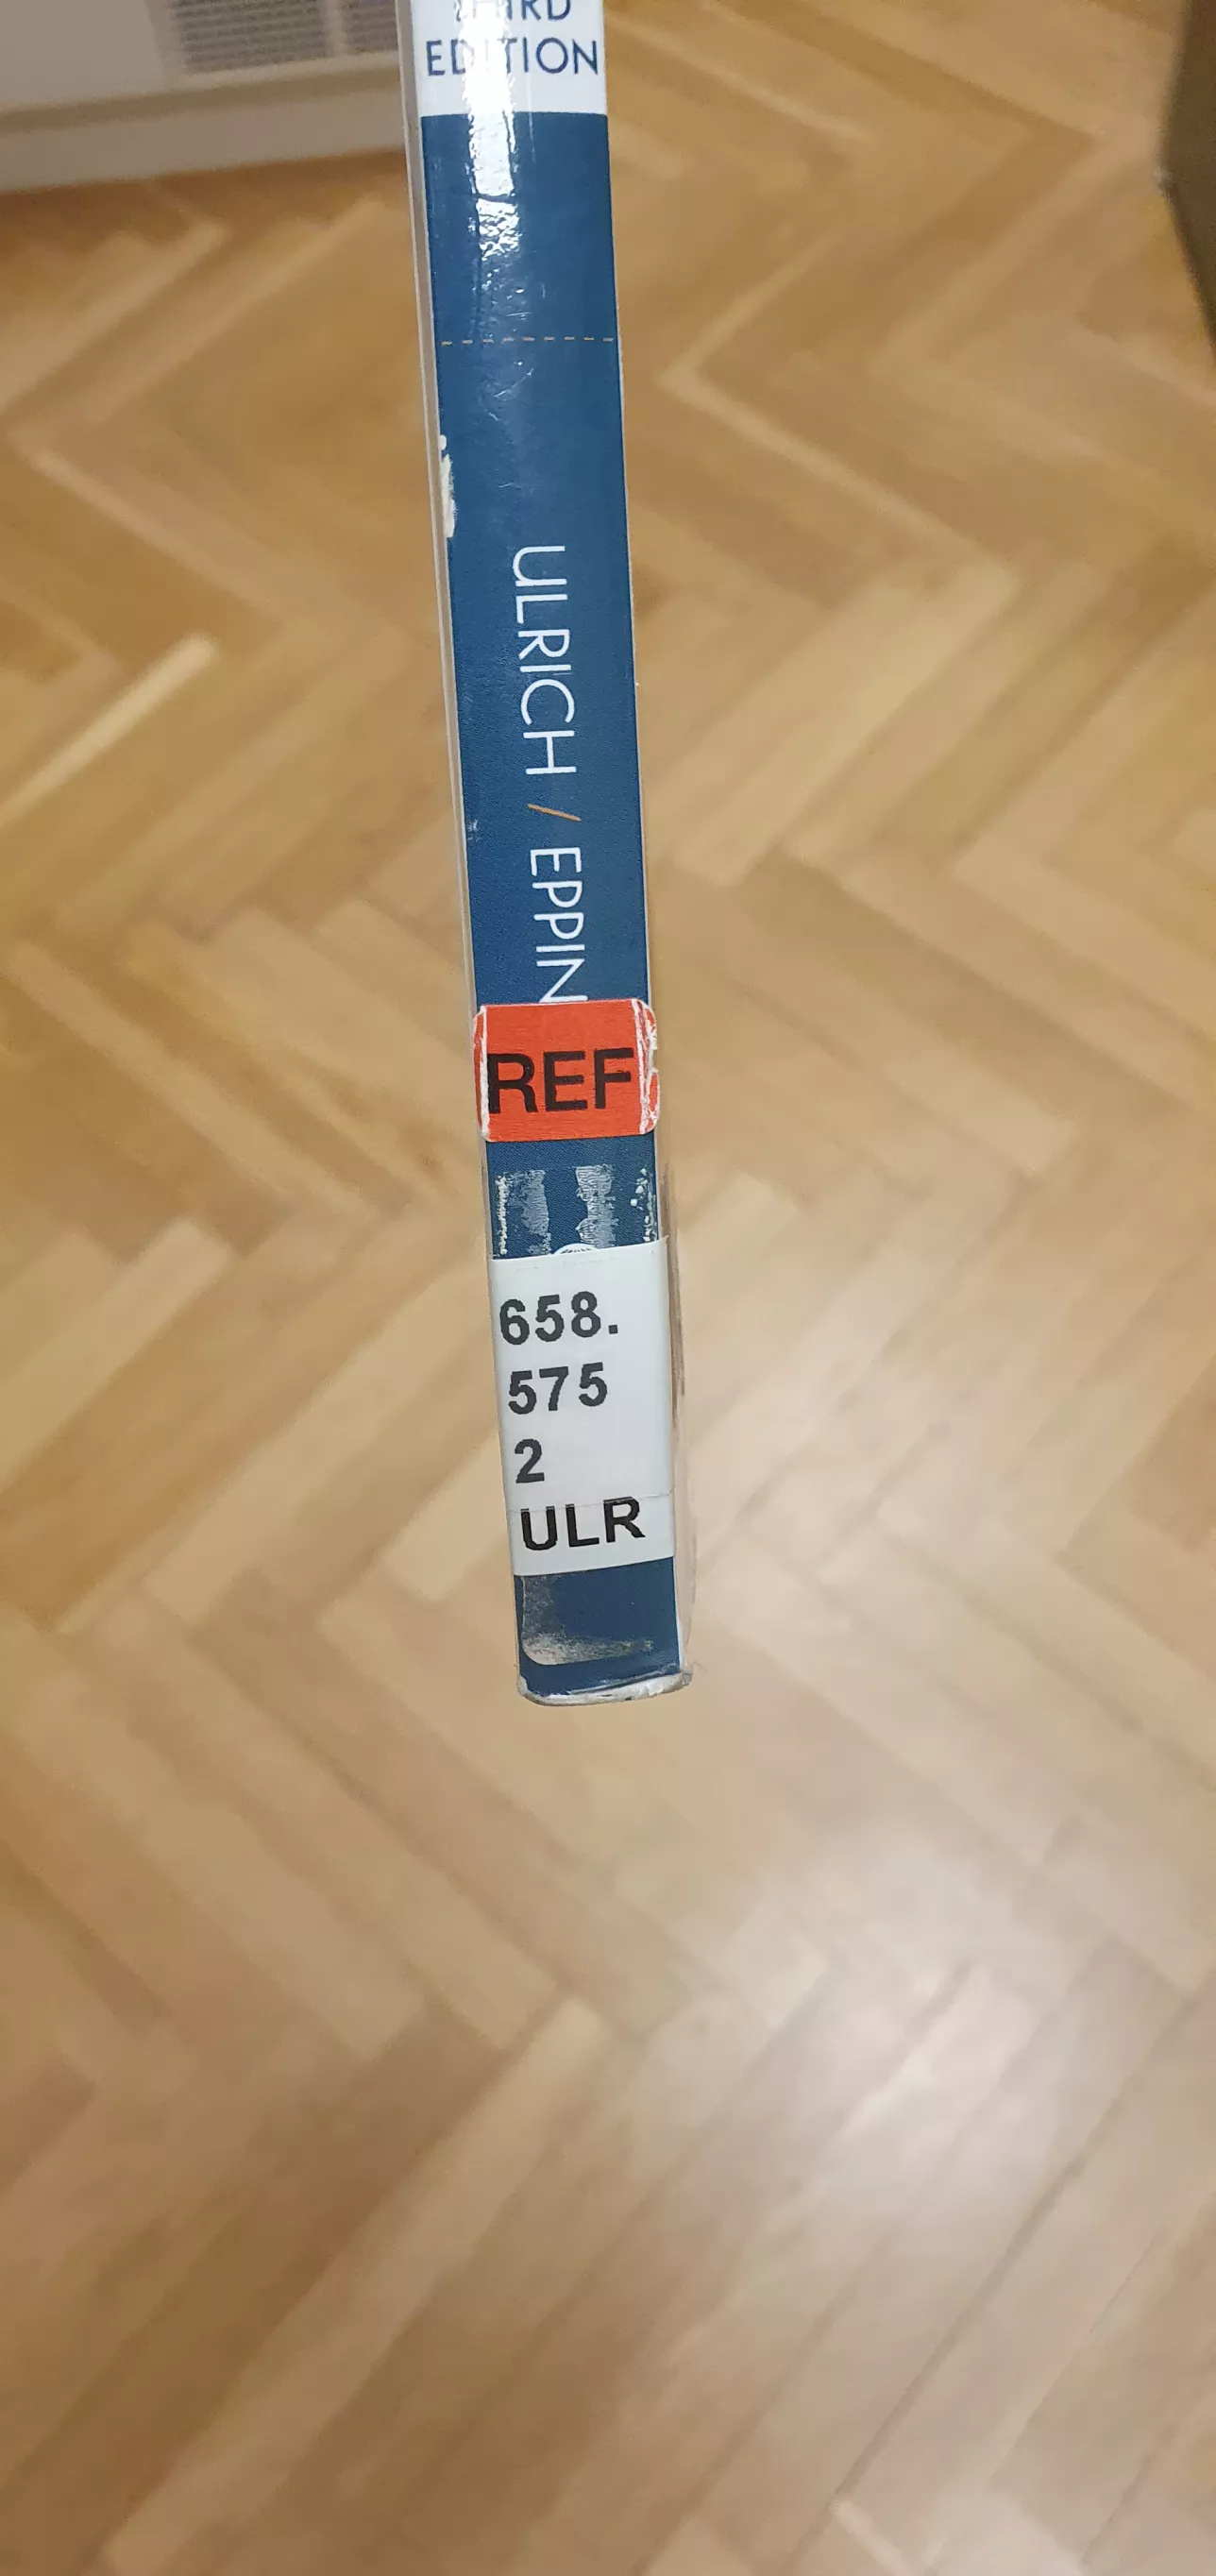 book spine with a red sticker reading ref as reference material